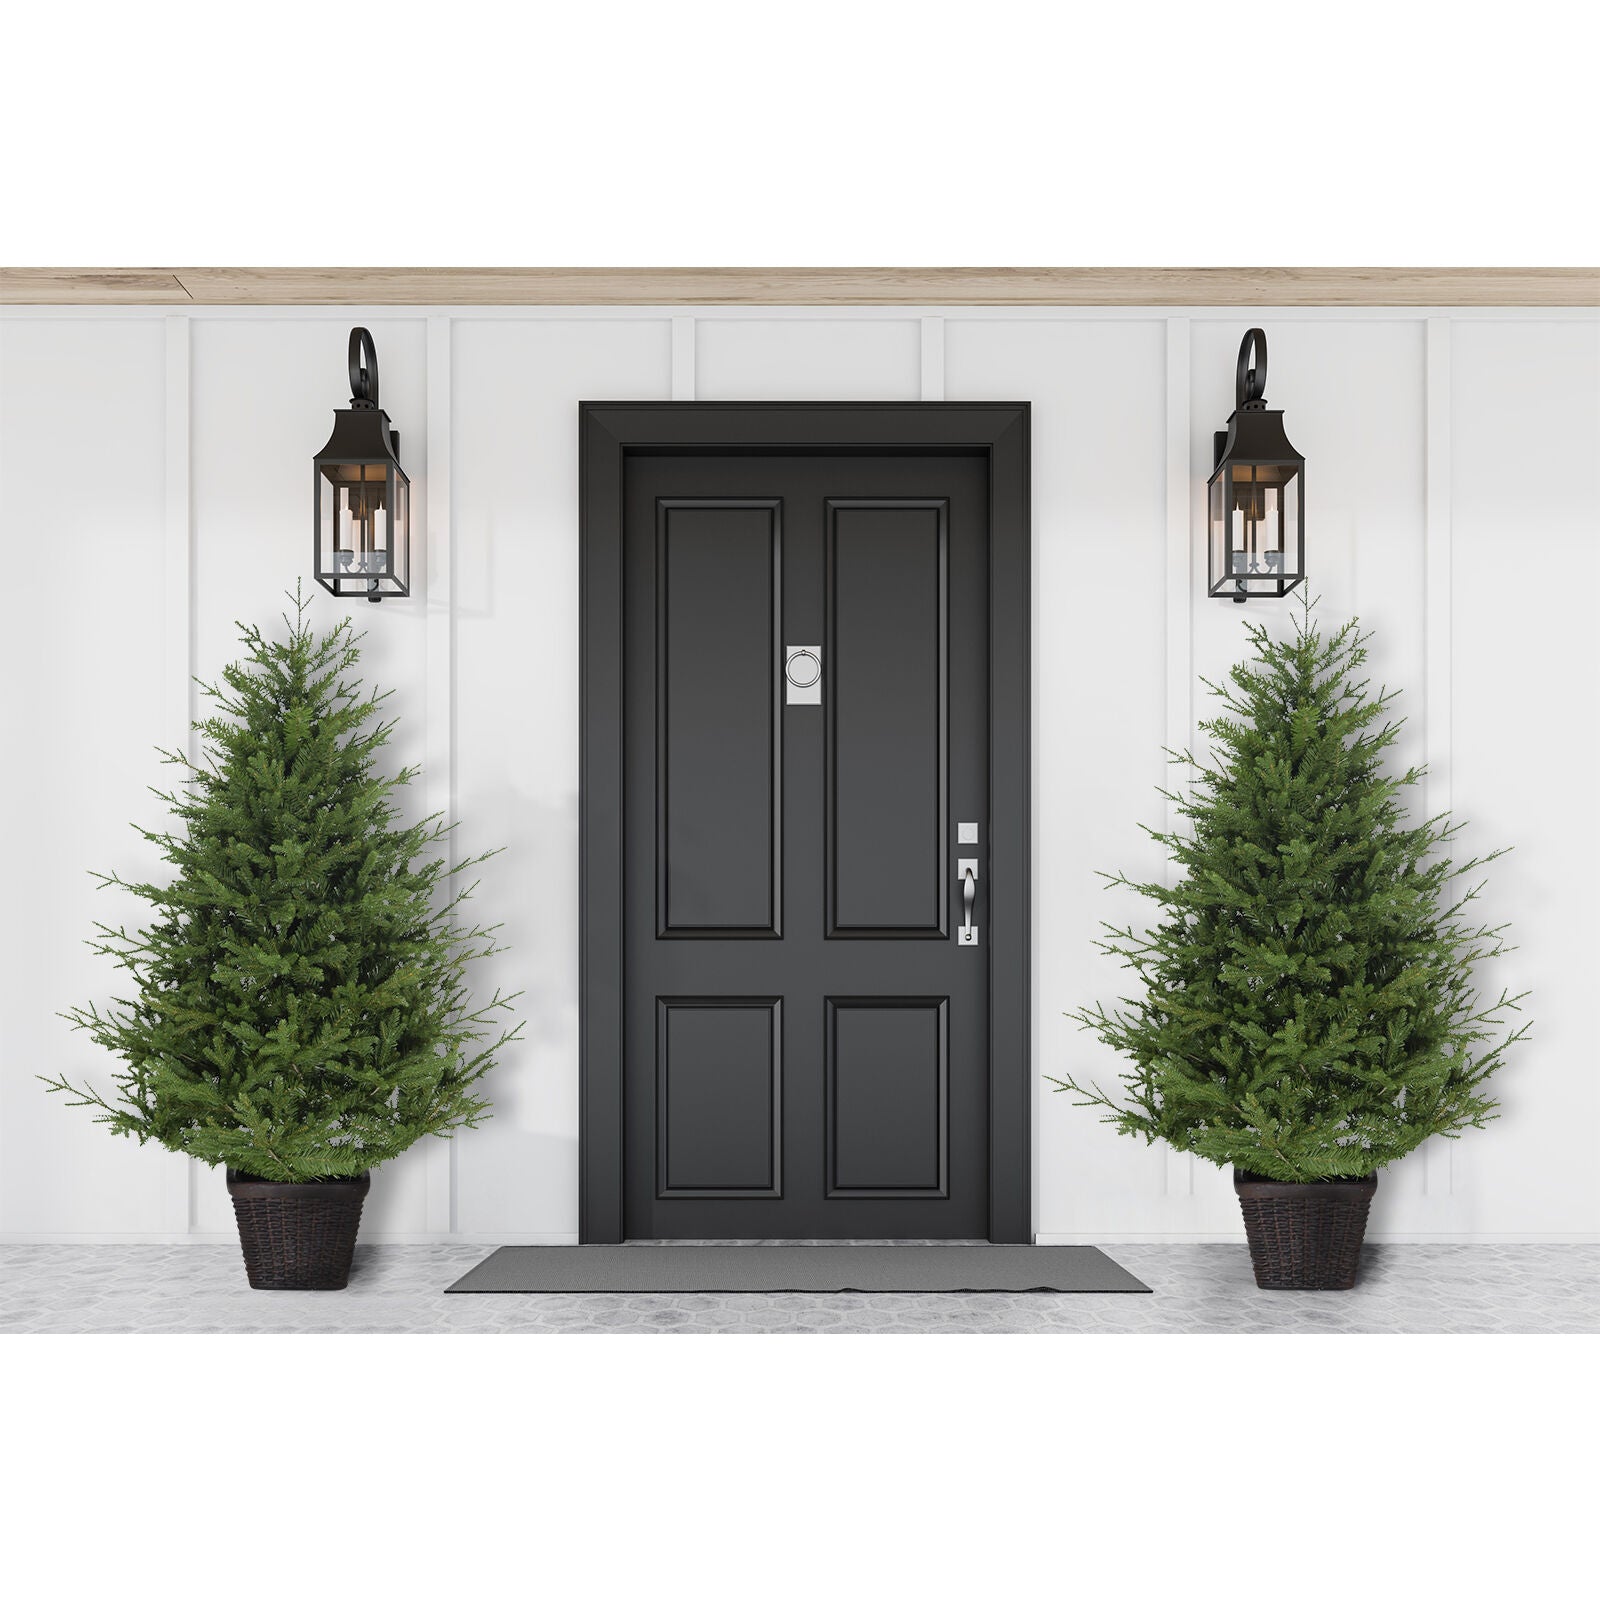 Fraser Hill Farm -  5.0-Ft Adirondack Potted Christmas Tree Décor